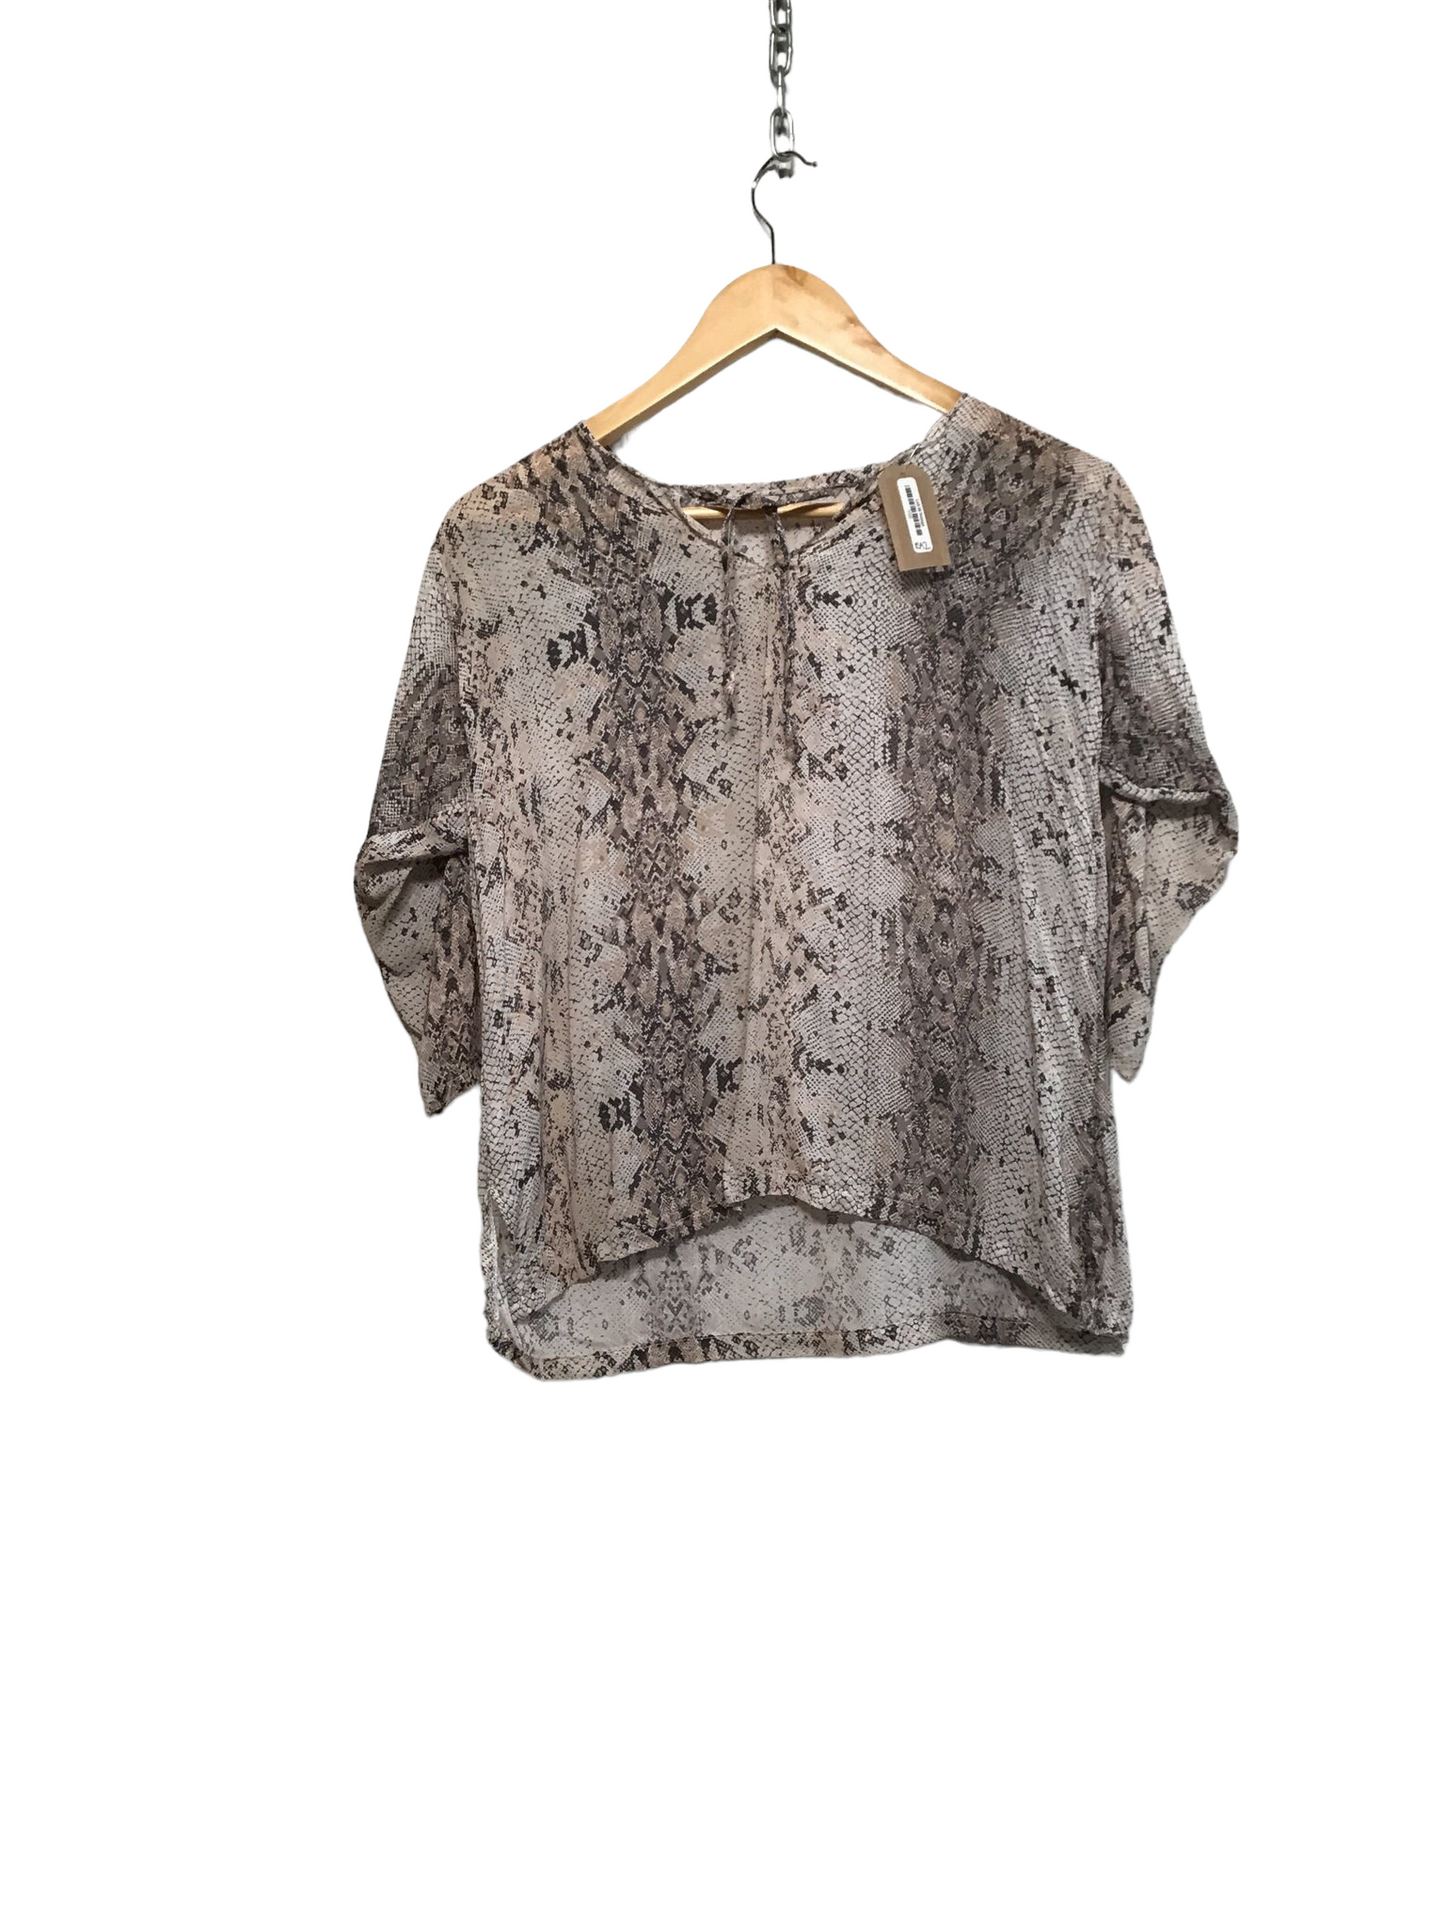 Fitted Snake Skin Women’s Formal Long Sleeve (Size M)